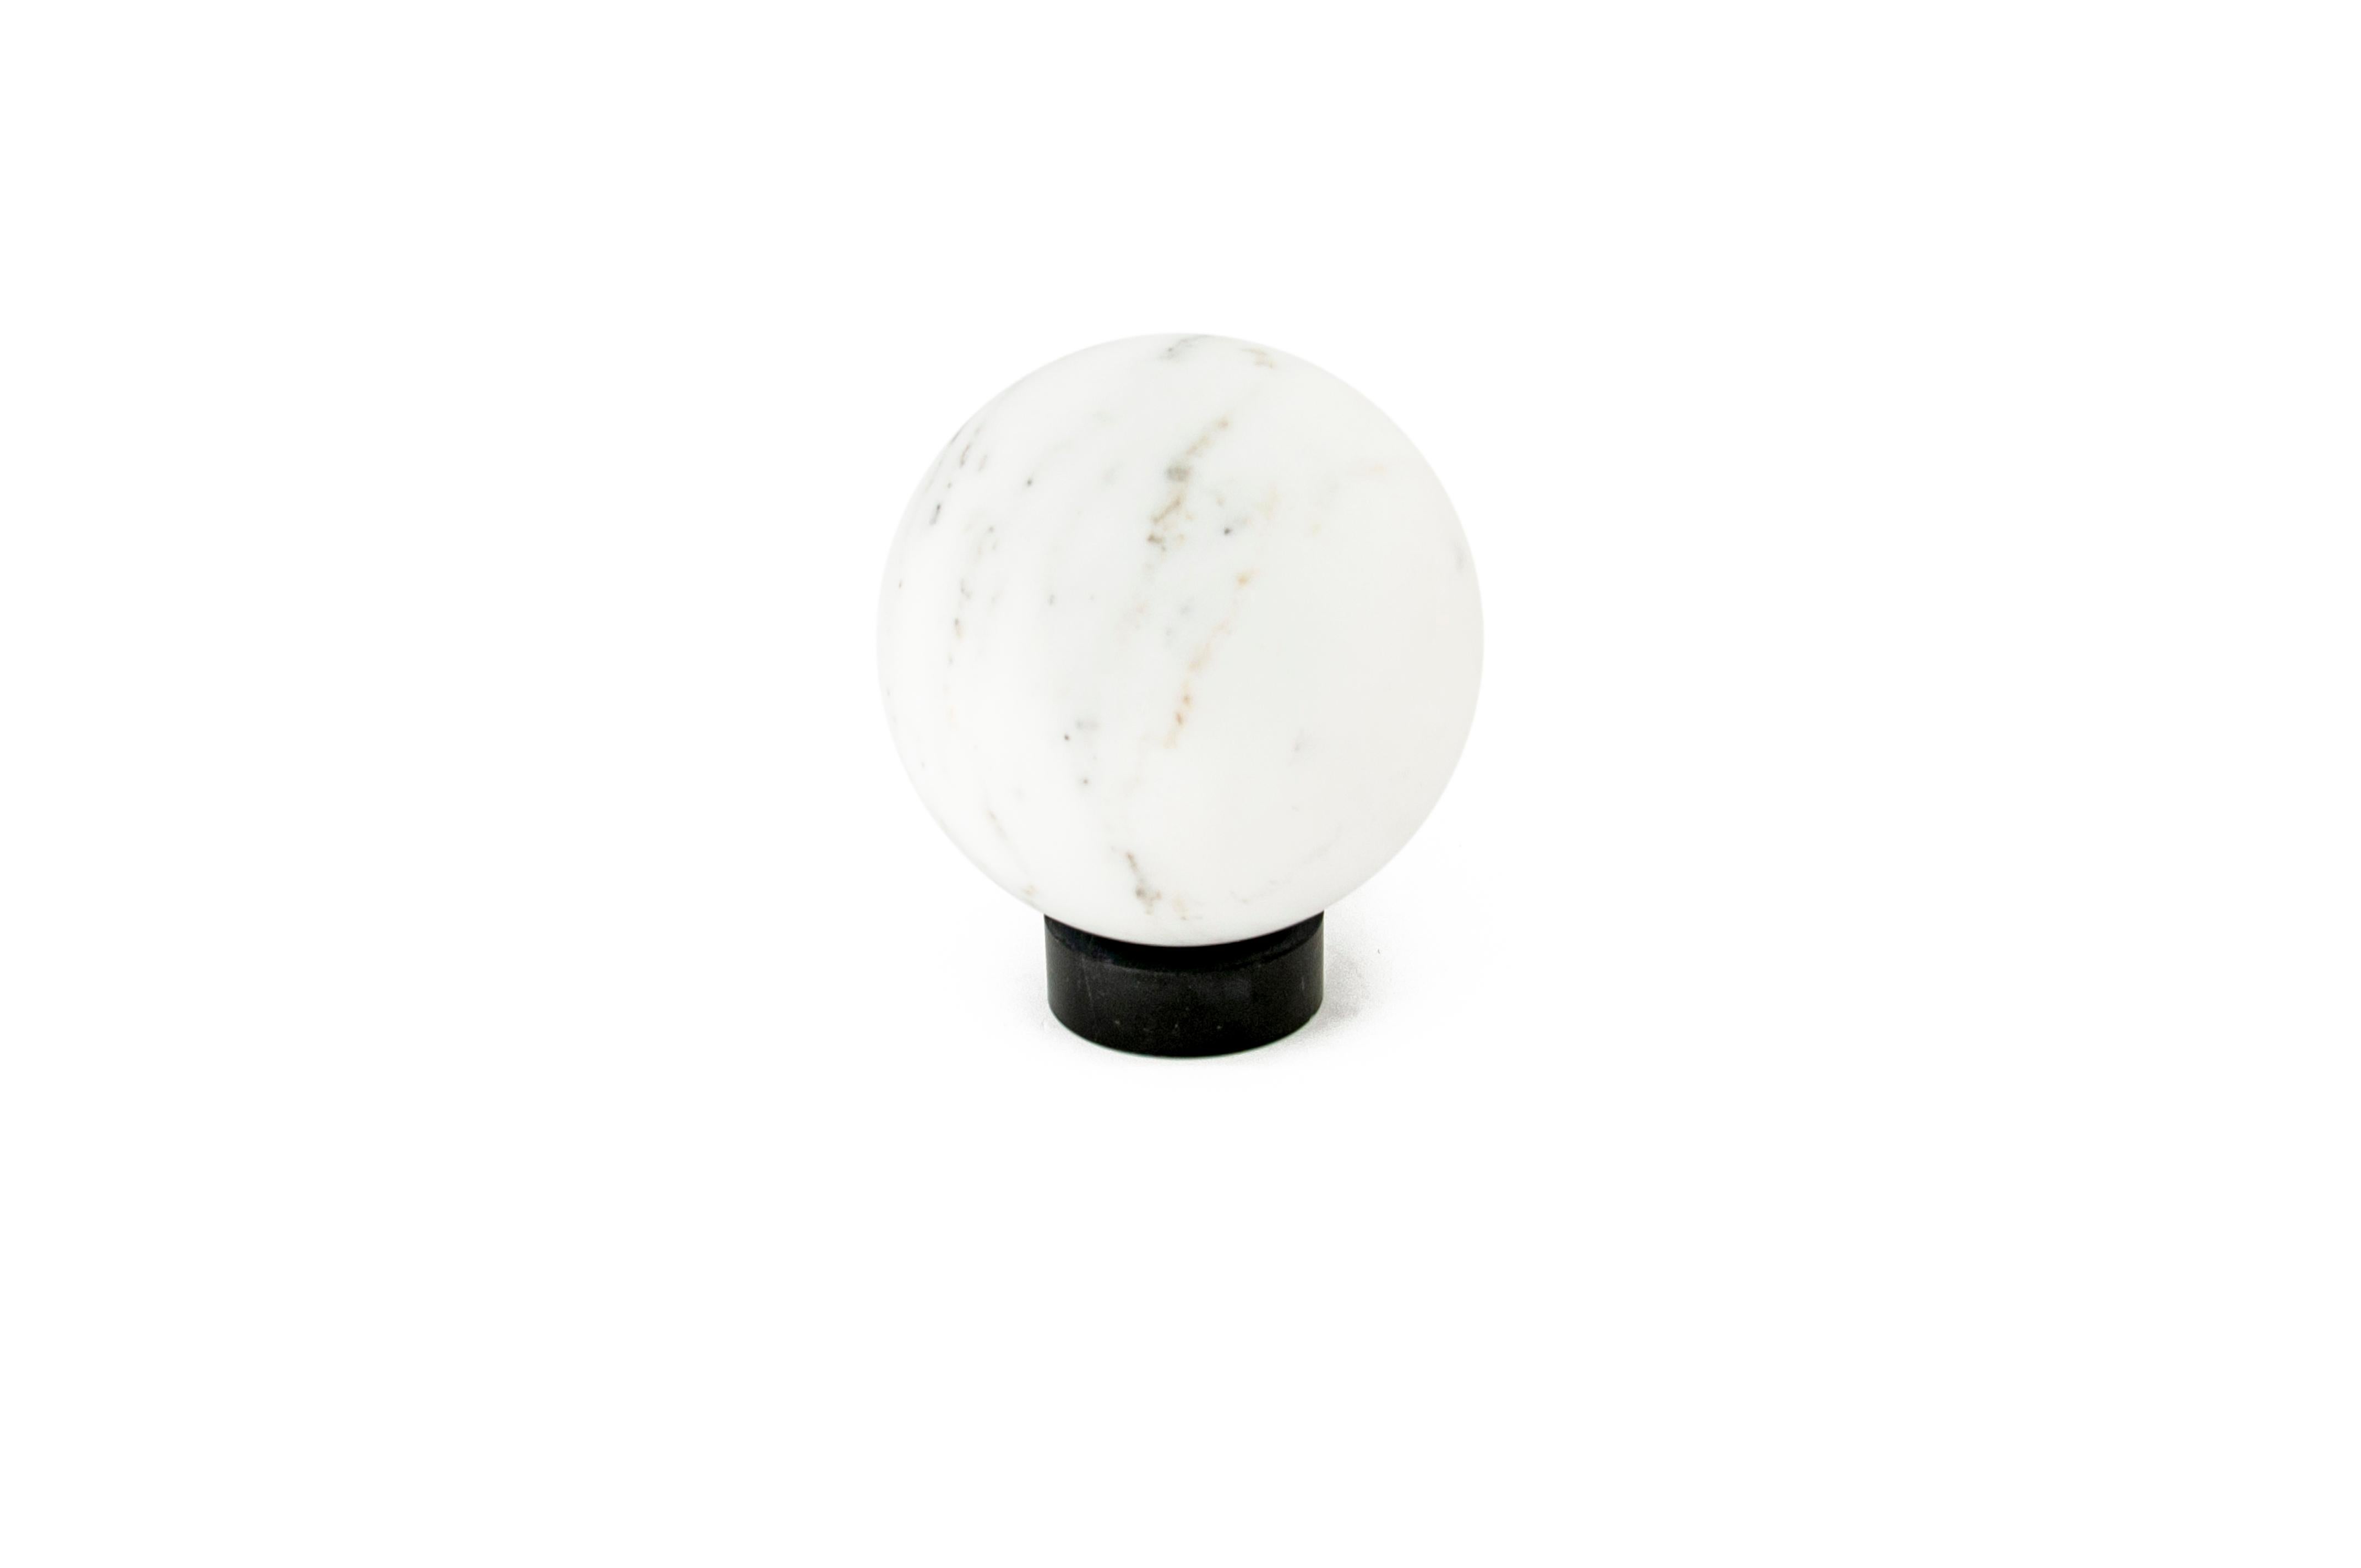 Handmade Medium Paperweight with Sphere Shape in Satin White Carrara Marble For Sale 3